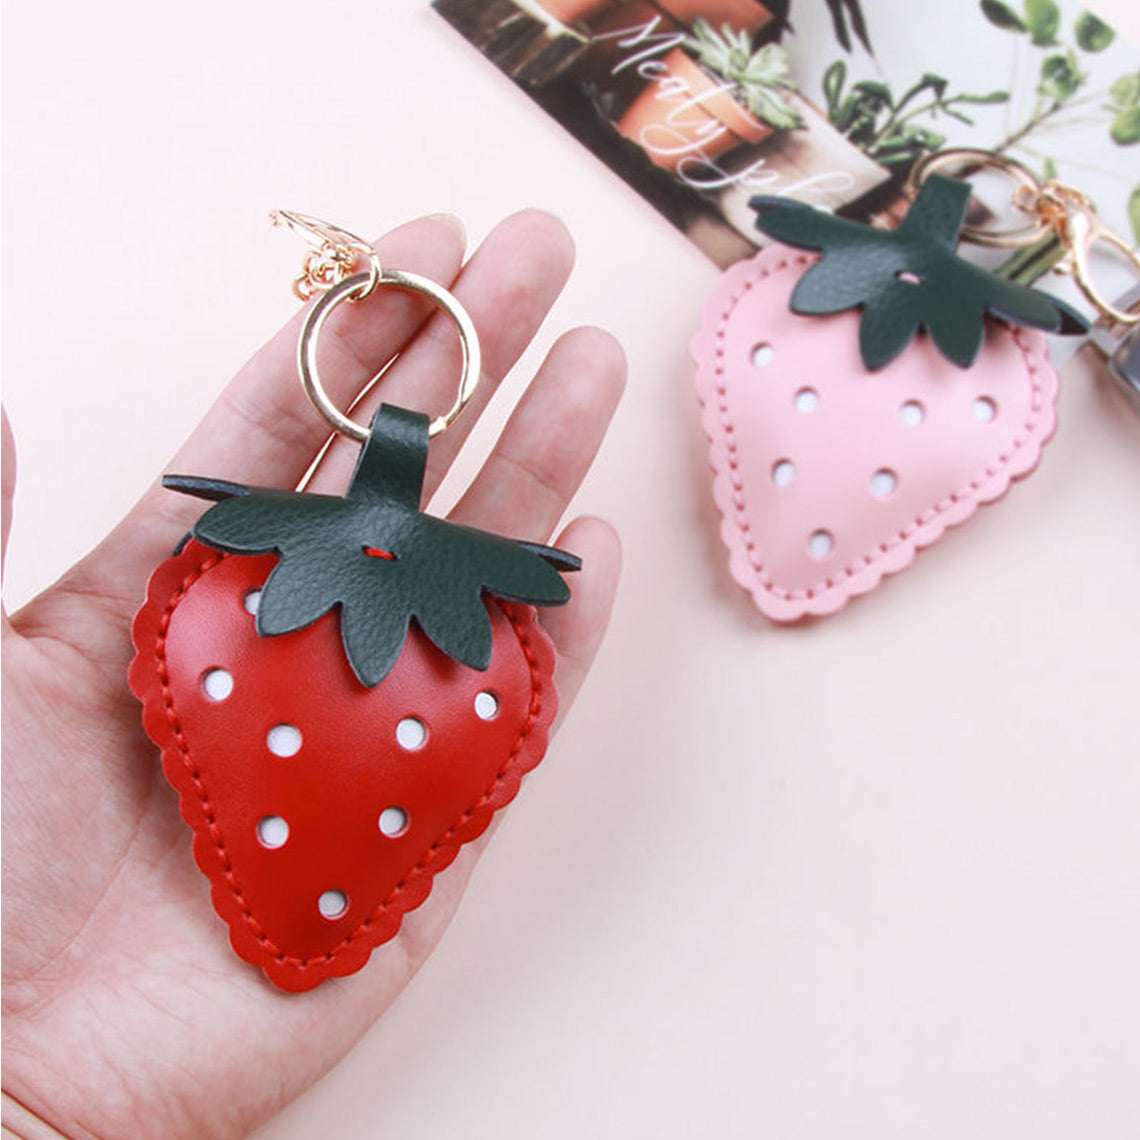 Strawberry Gift Idea - Leather Strawberry Keychain | POPSEWING™